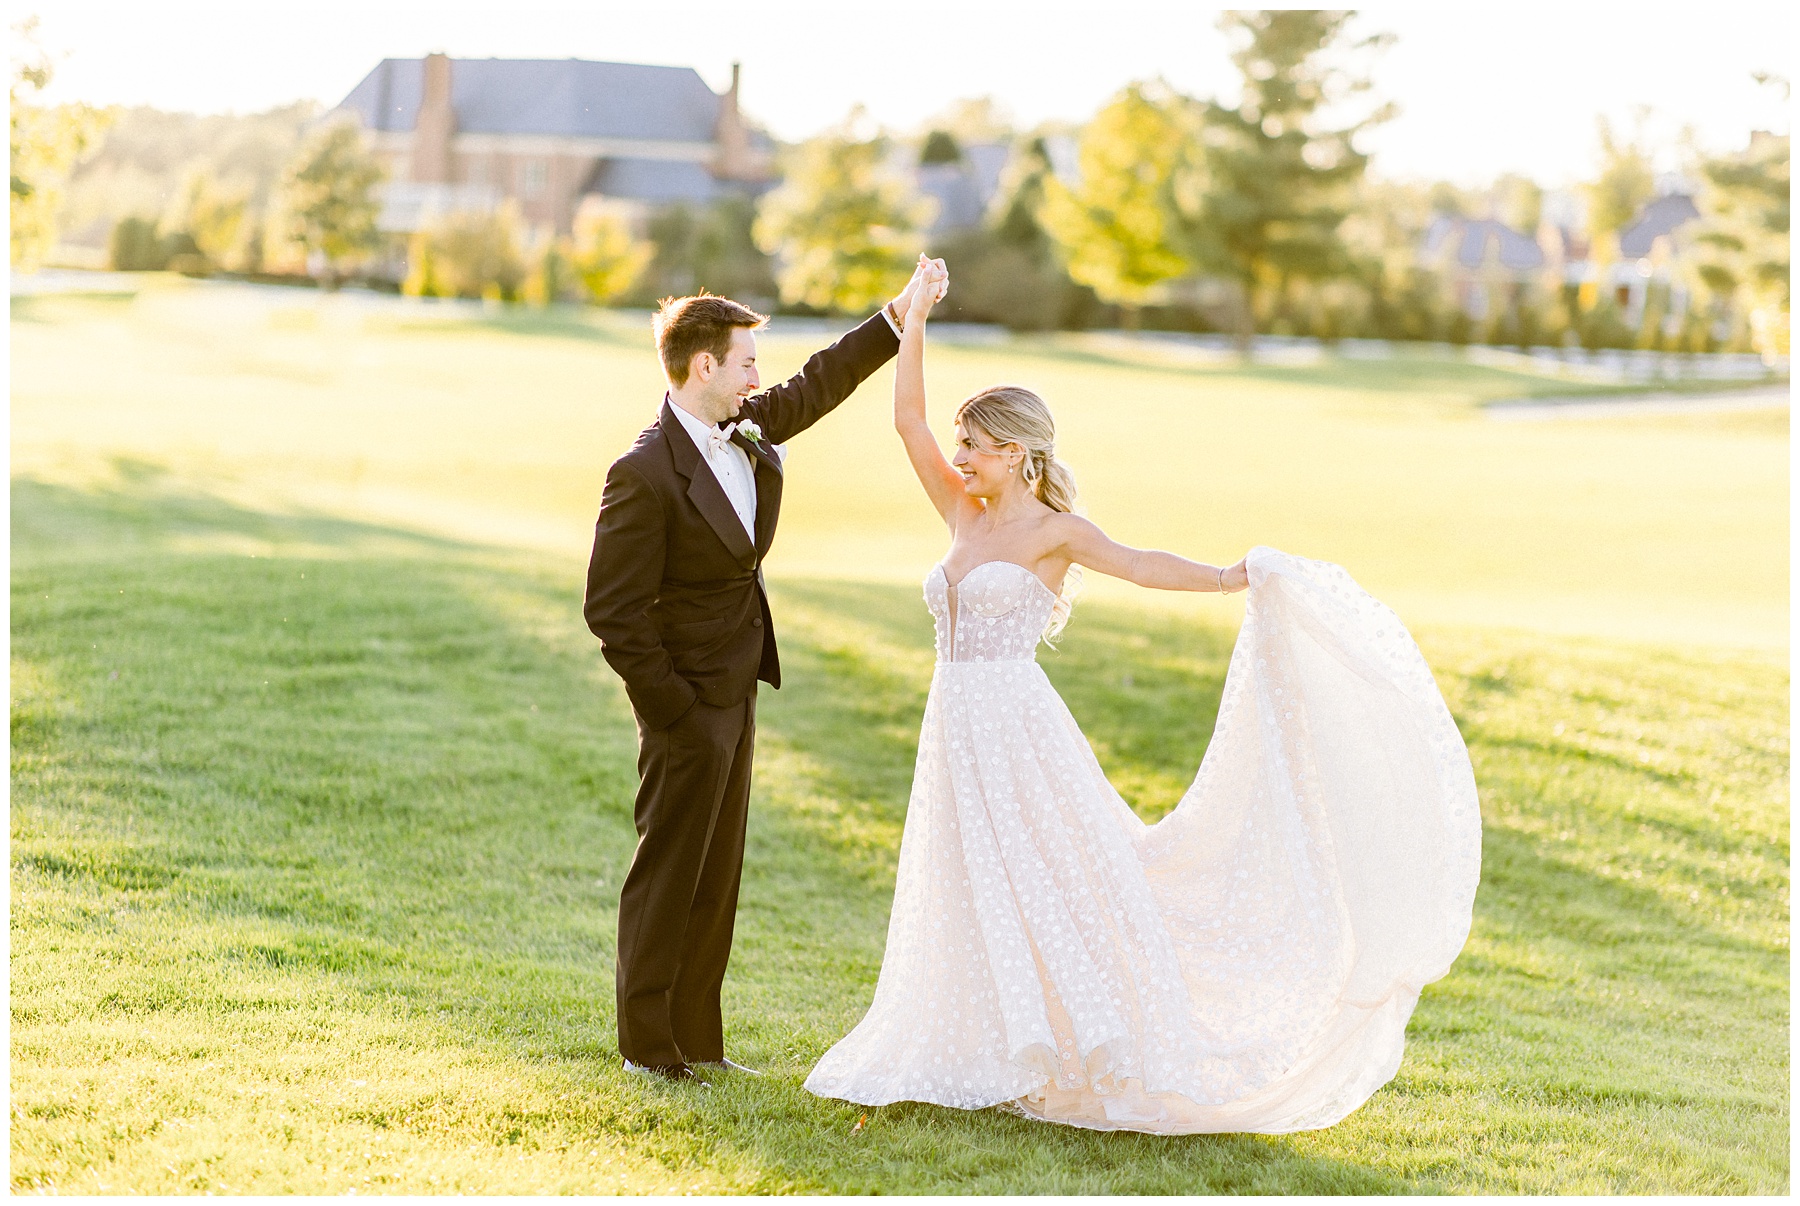 Bride and Groom sunset Portraits at New Albany Country Club in Columbus Ohio. Amanda Eloise Photography